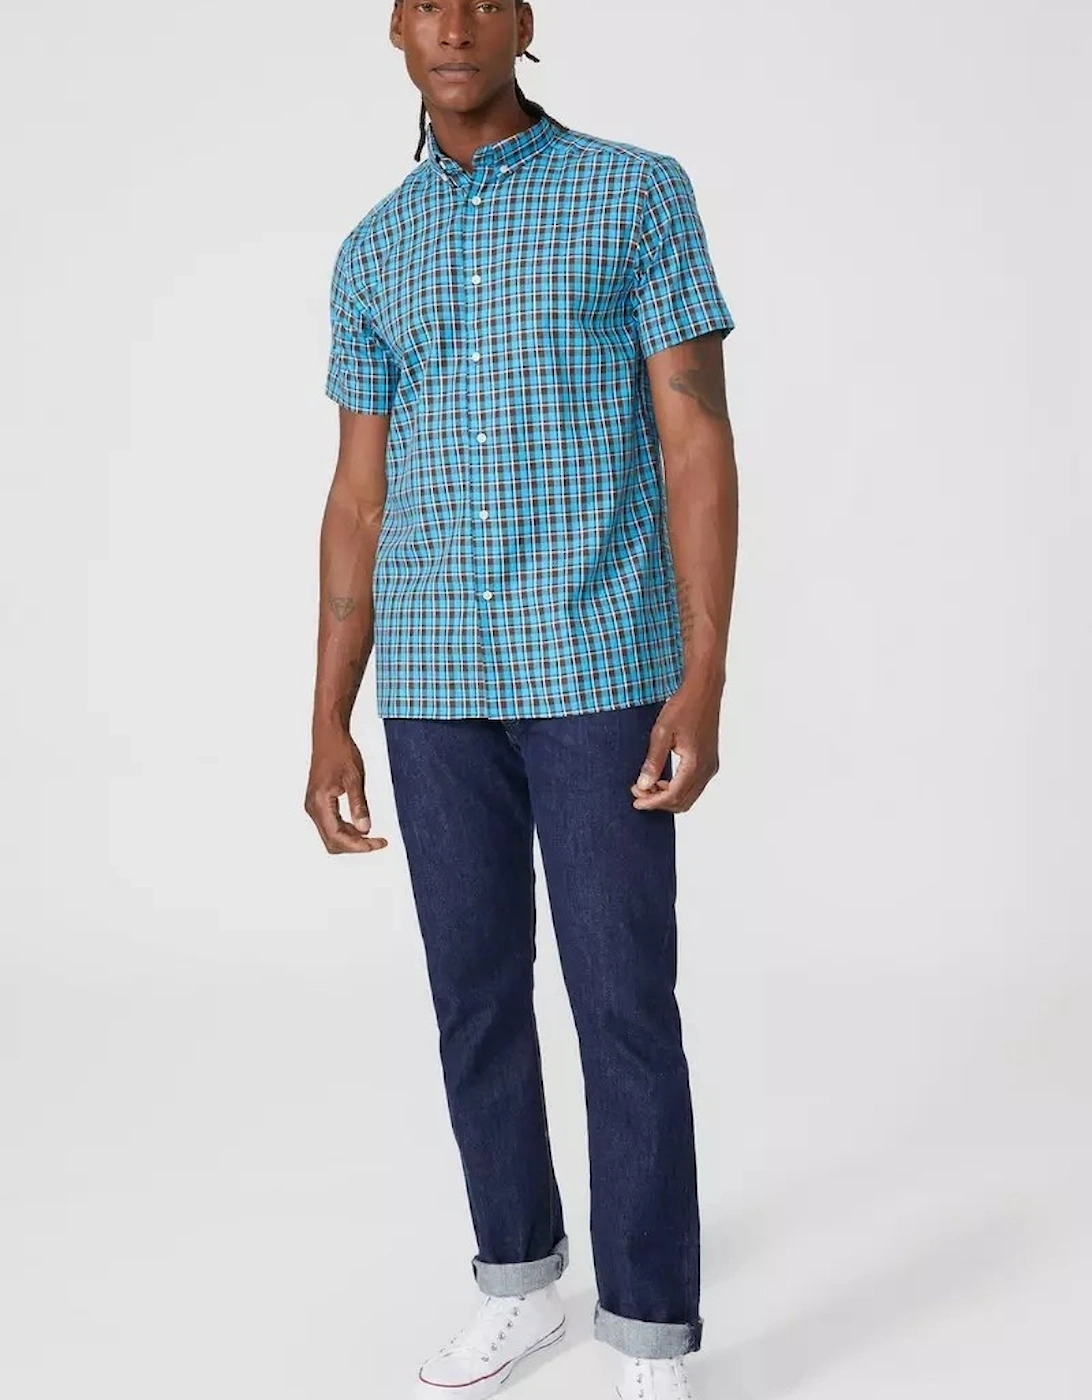 Mens Double Checked Shirt